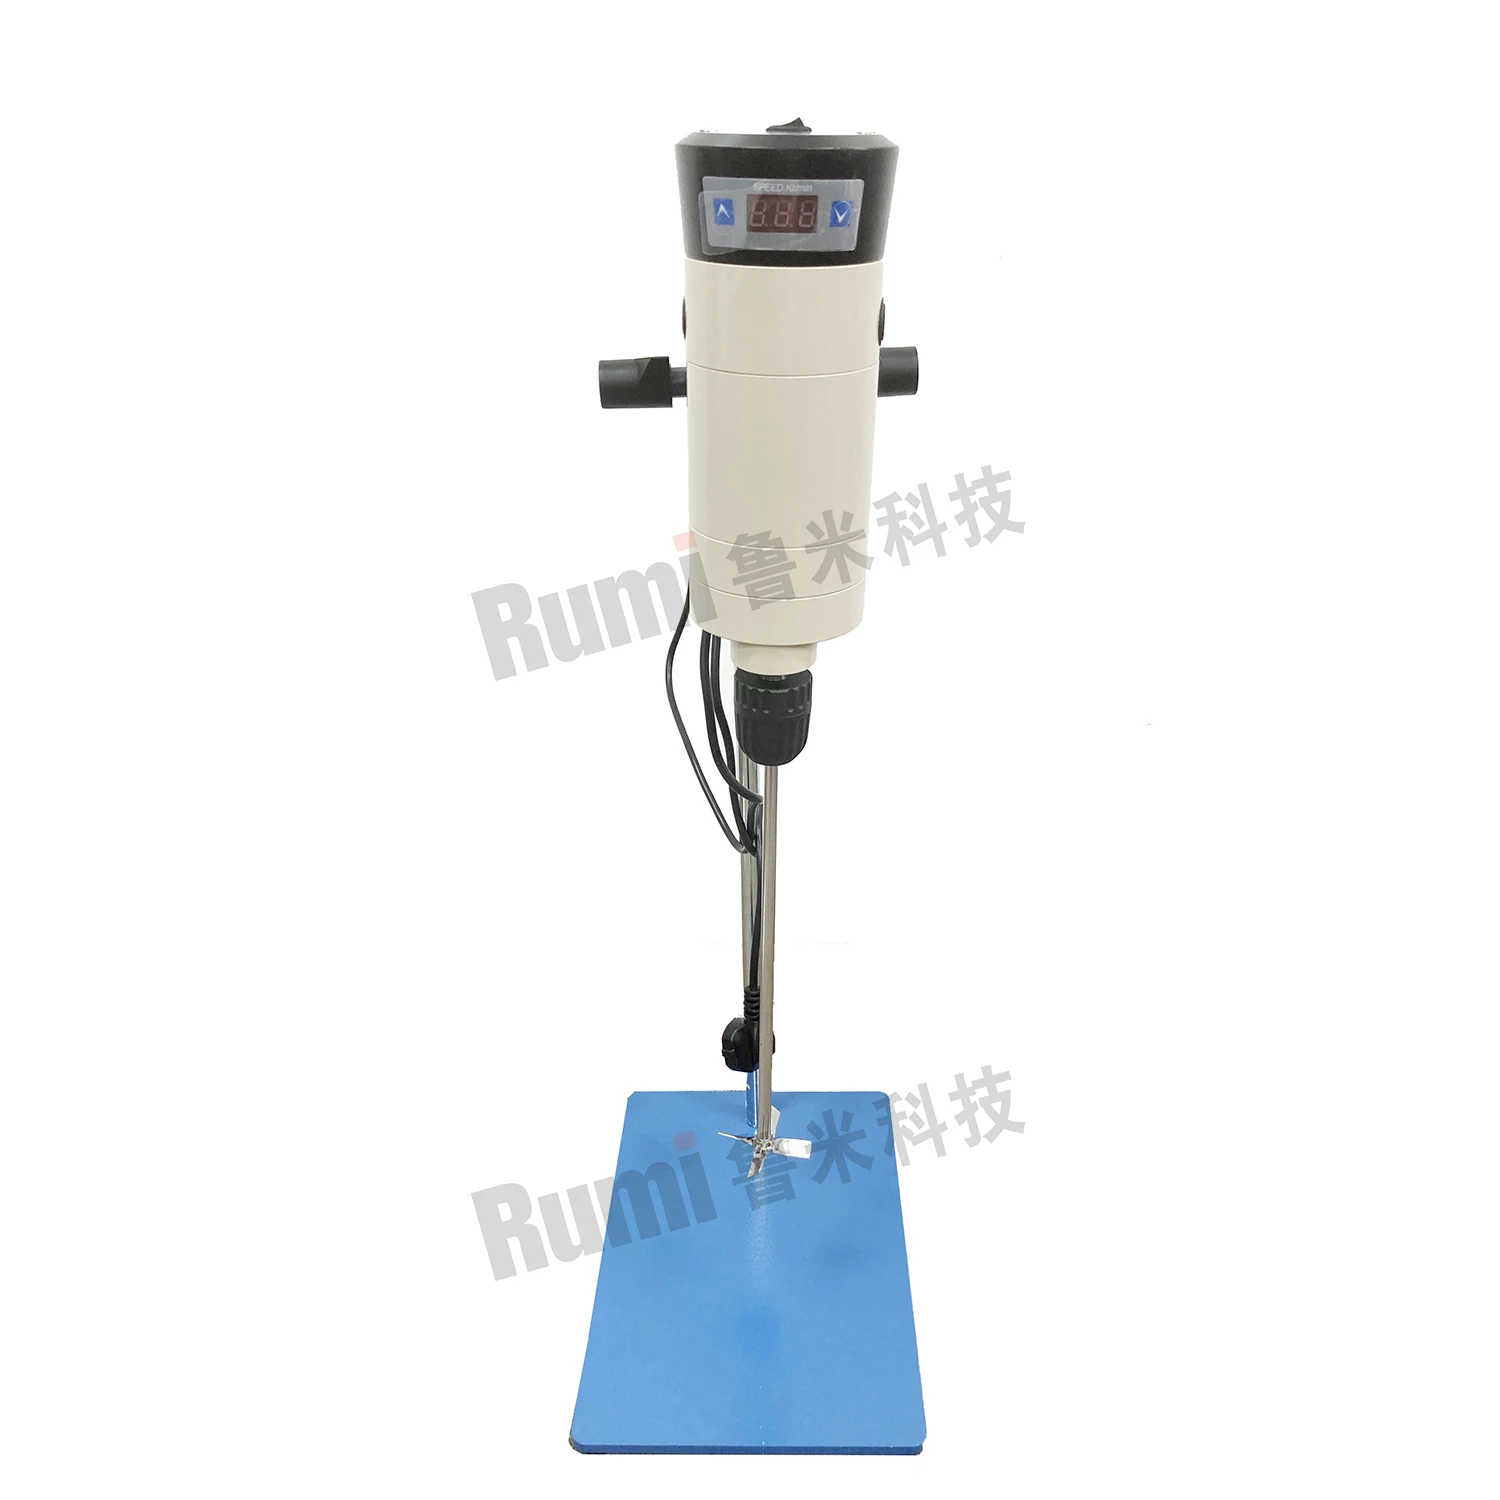 Low Cost Digital Display Laboratory High Speed Disperser Stirrer Dissolver Mixer With Interchangeable Agitators manufacture